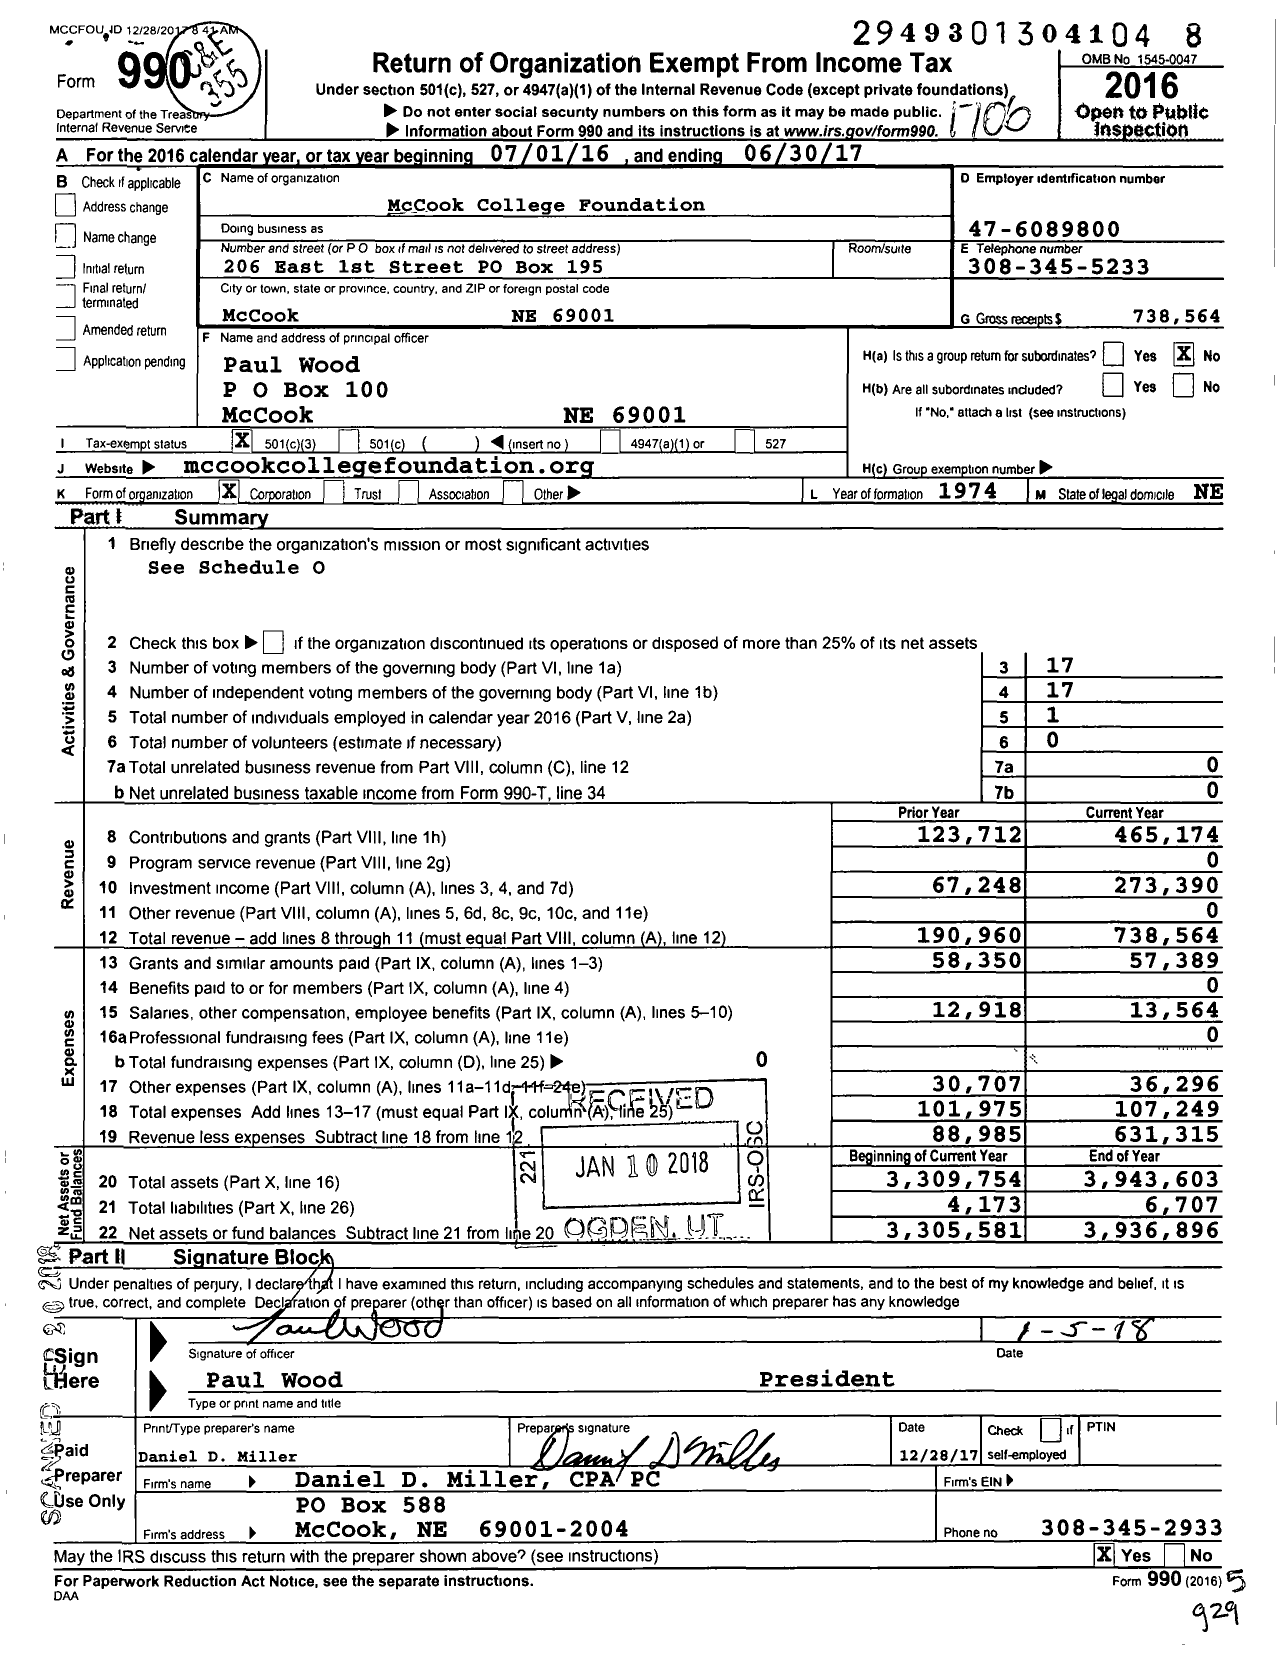 Image of first page of 2016 Form 990 for Mccook College Foundation